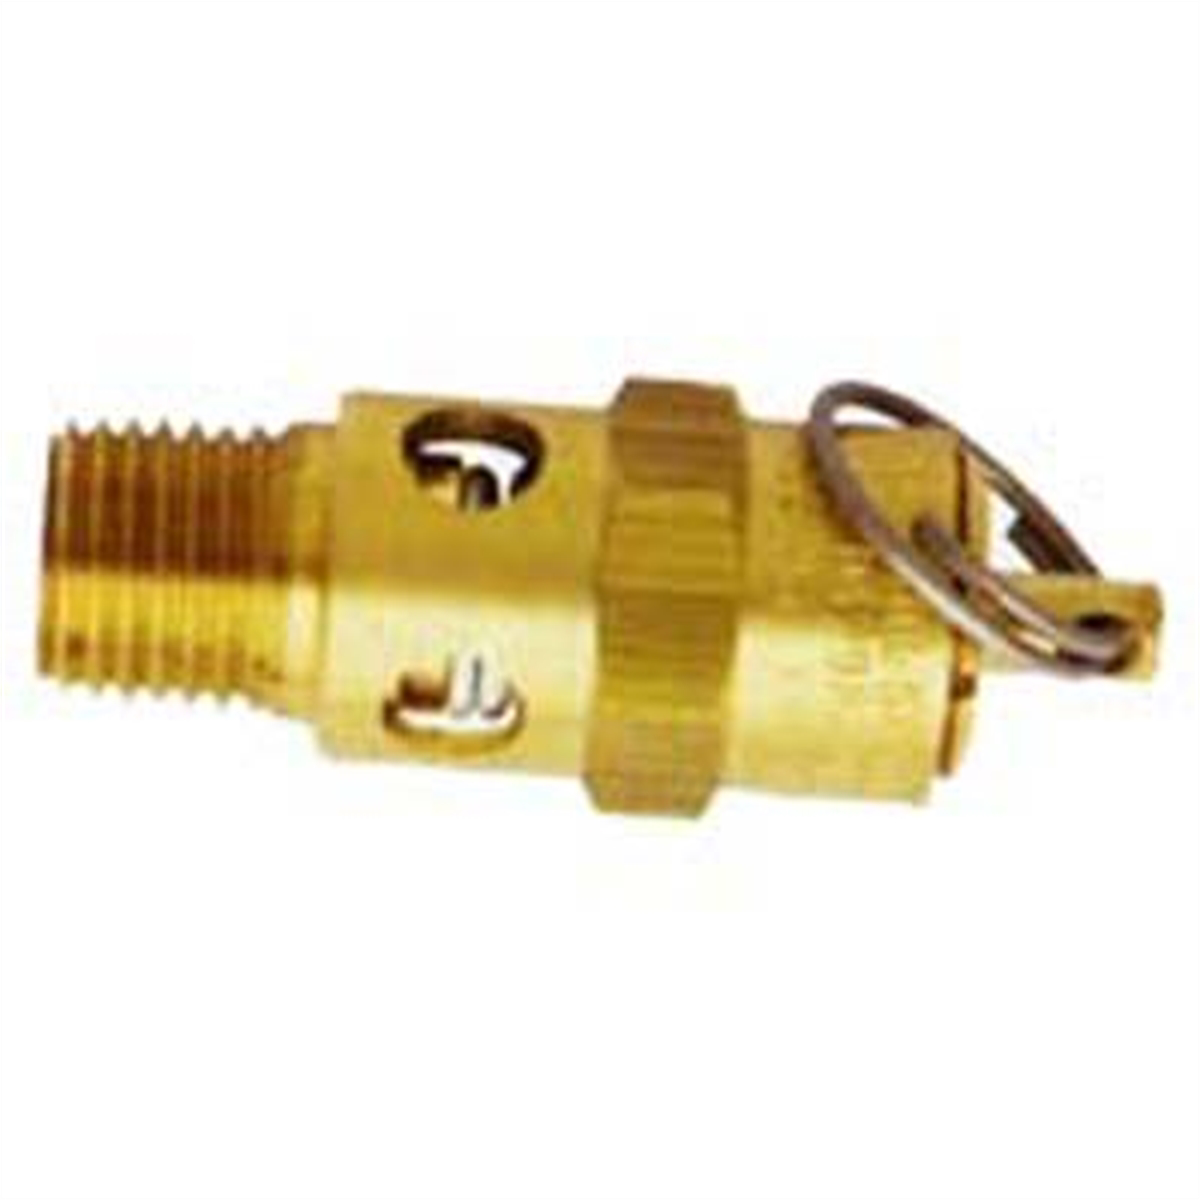 ASME Coded Safety Valve - 1/4 In Male NPT 70 PSI